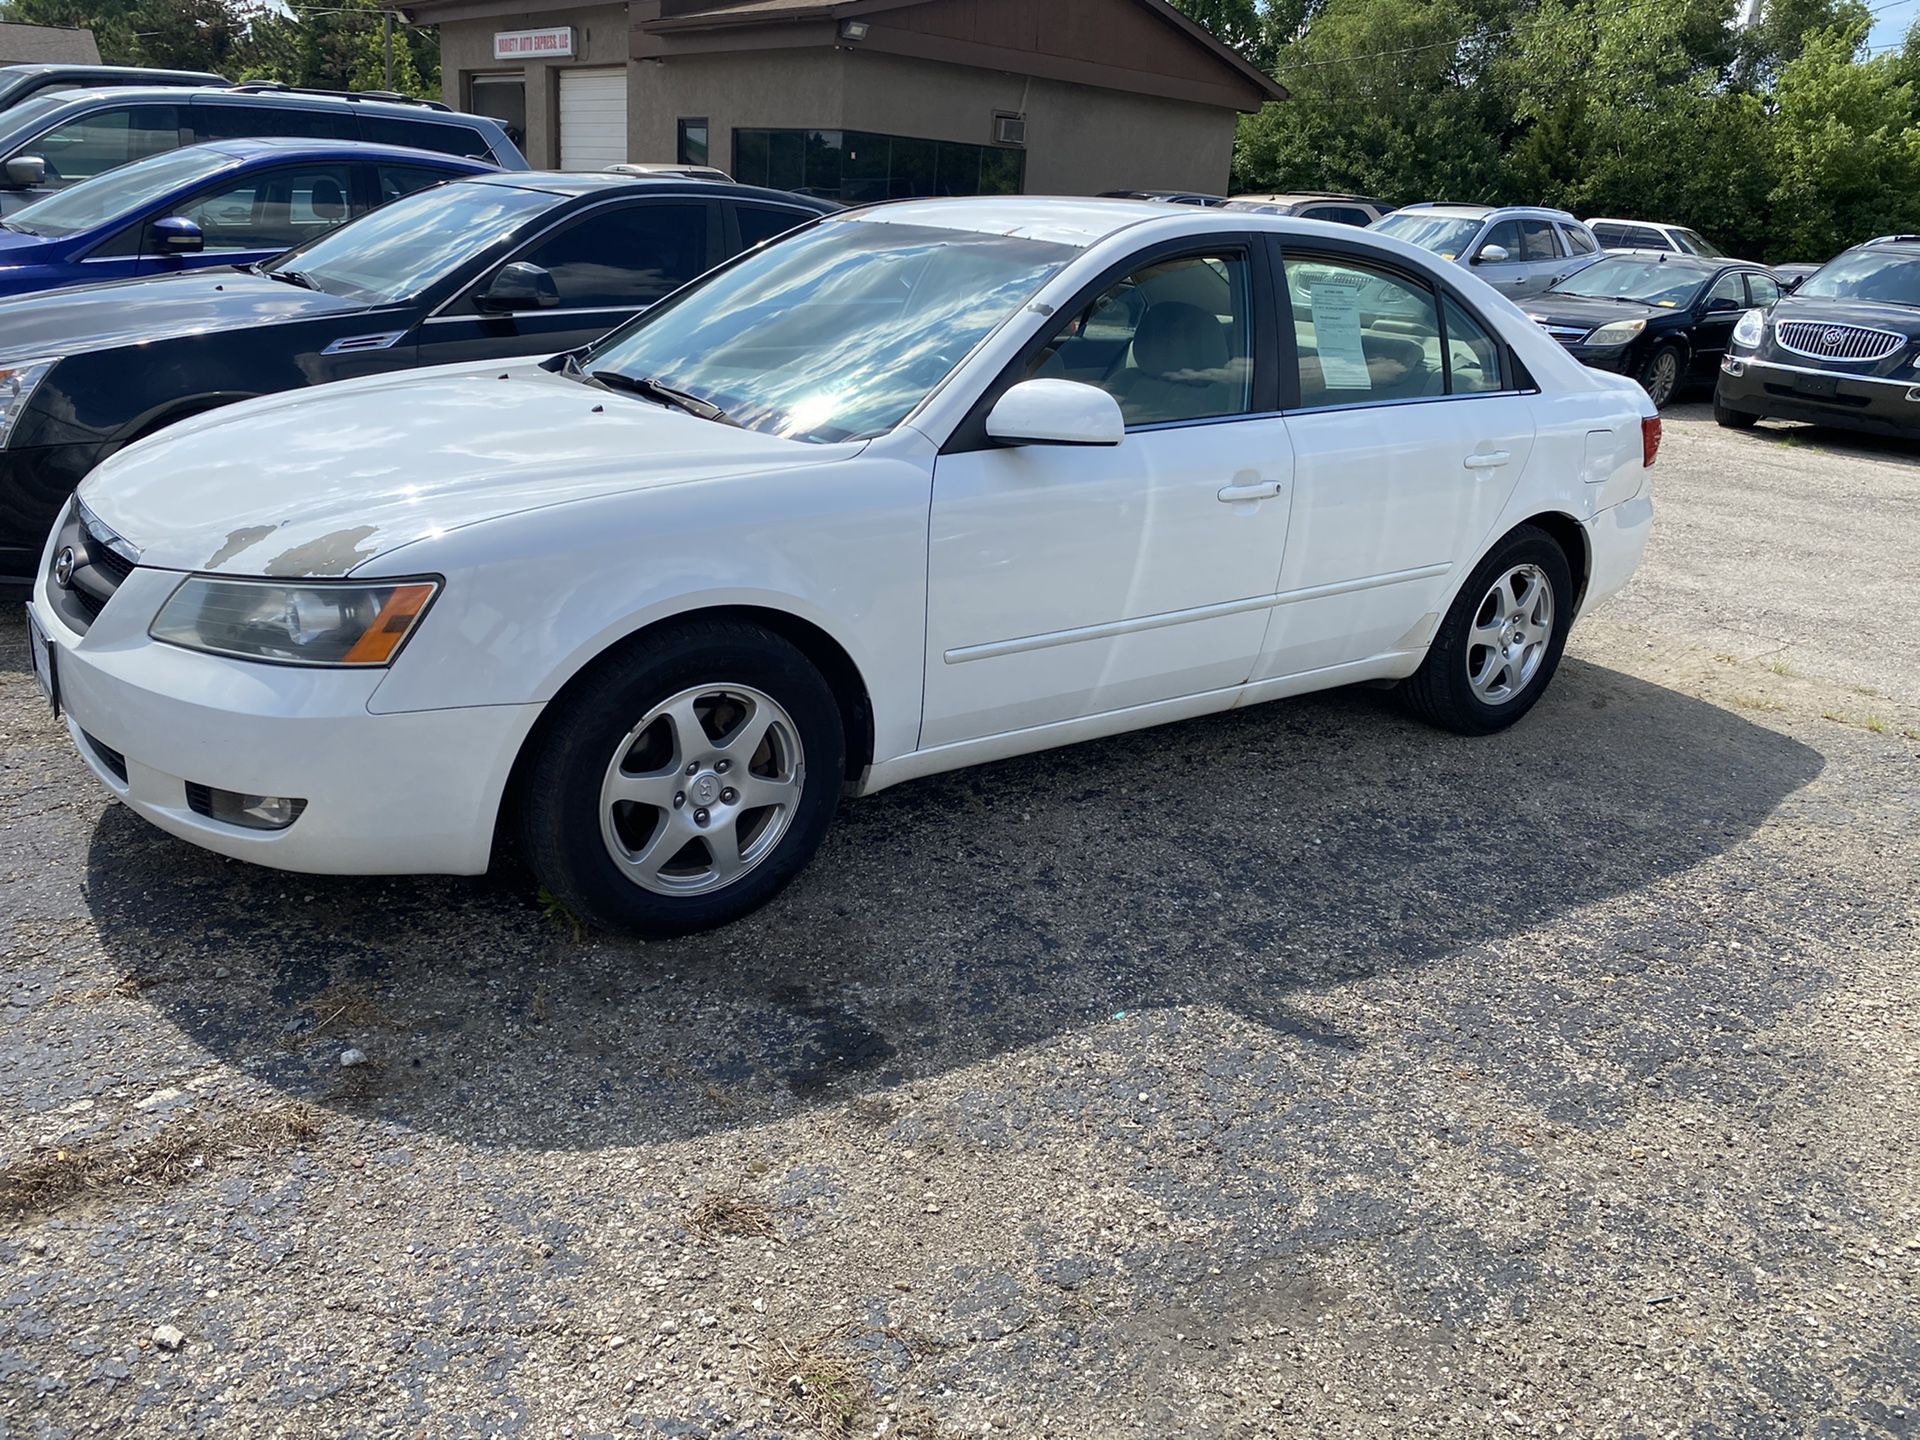 2006 Hyundai Sonata(147K) that’s in excellent mechanical running condition.paint pealing on the hood but it is on it way to the paint shop so no worr